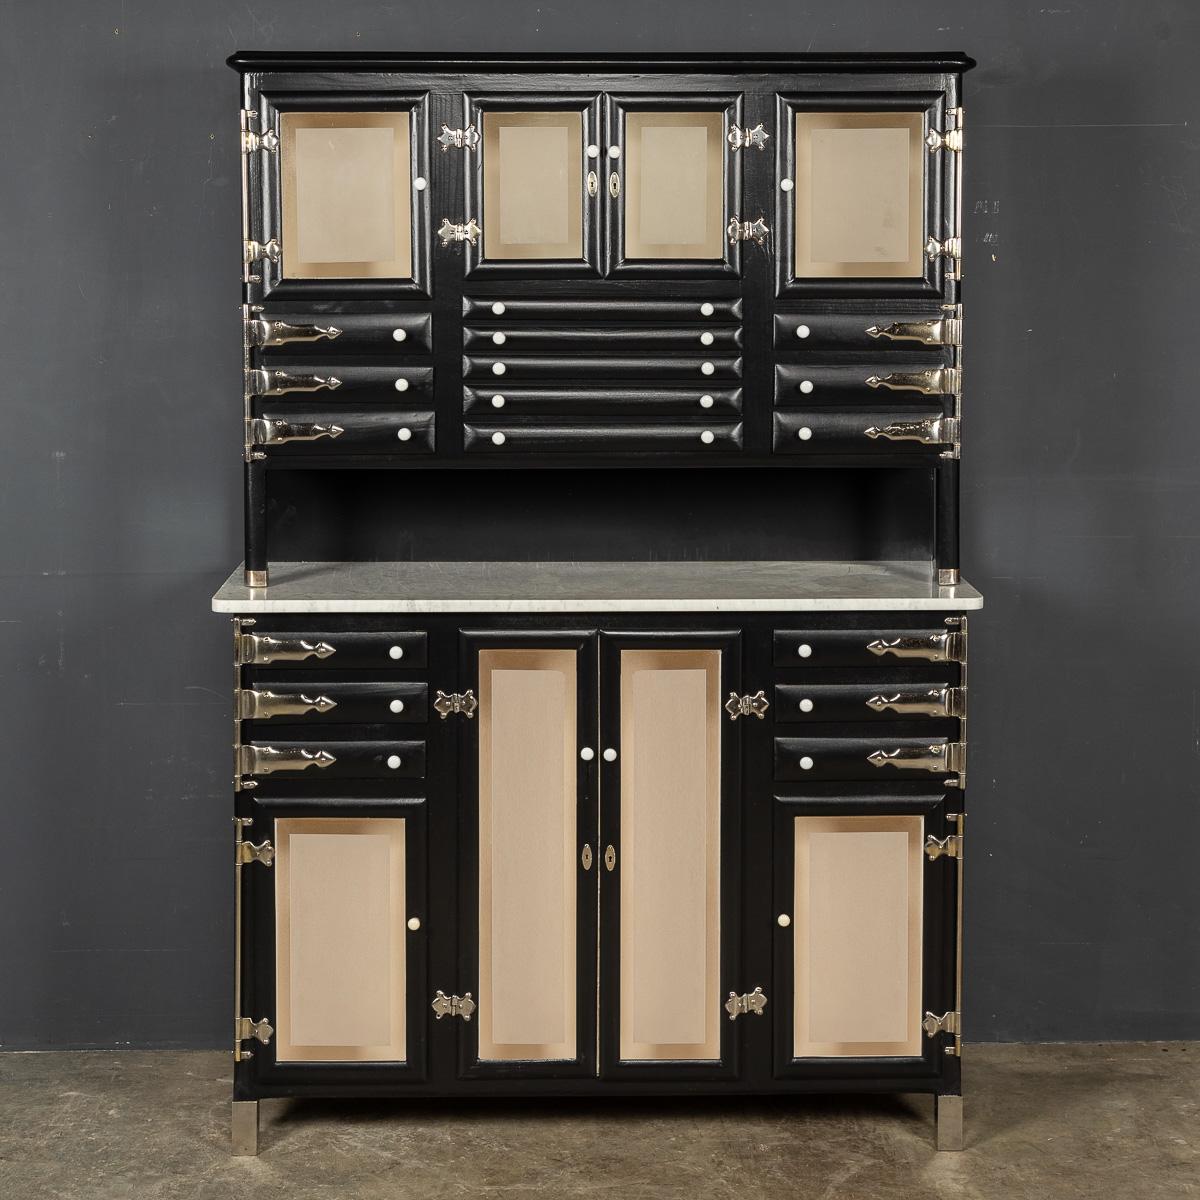 An exquisite piece from the 20th century, this sizable dentist cabinet, skillfully crafted and coated in a rich black finish, bears the signature style of the renowned Italian supplier, Alessandro Weiss. The cabinet showcases meticulous attention to